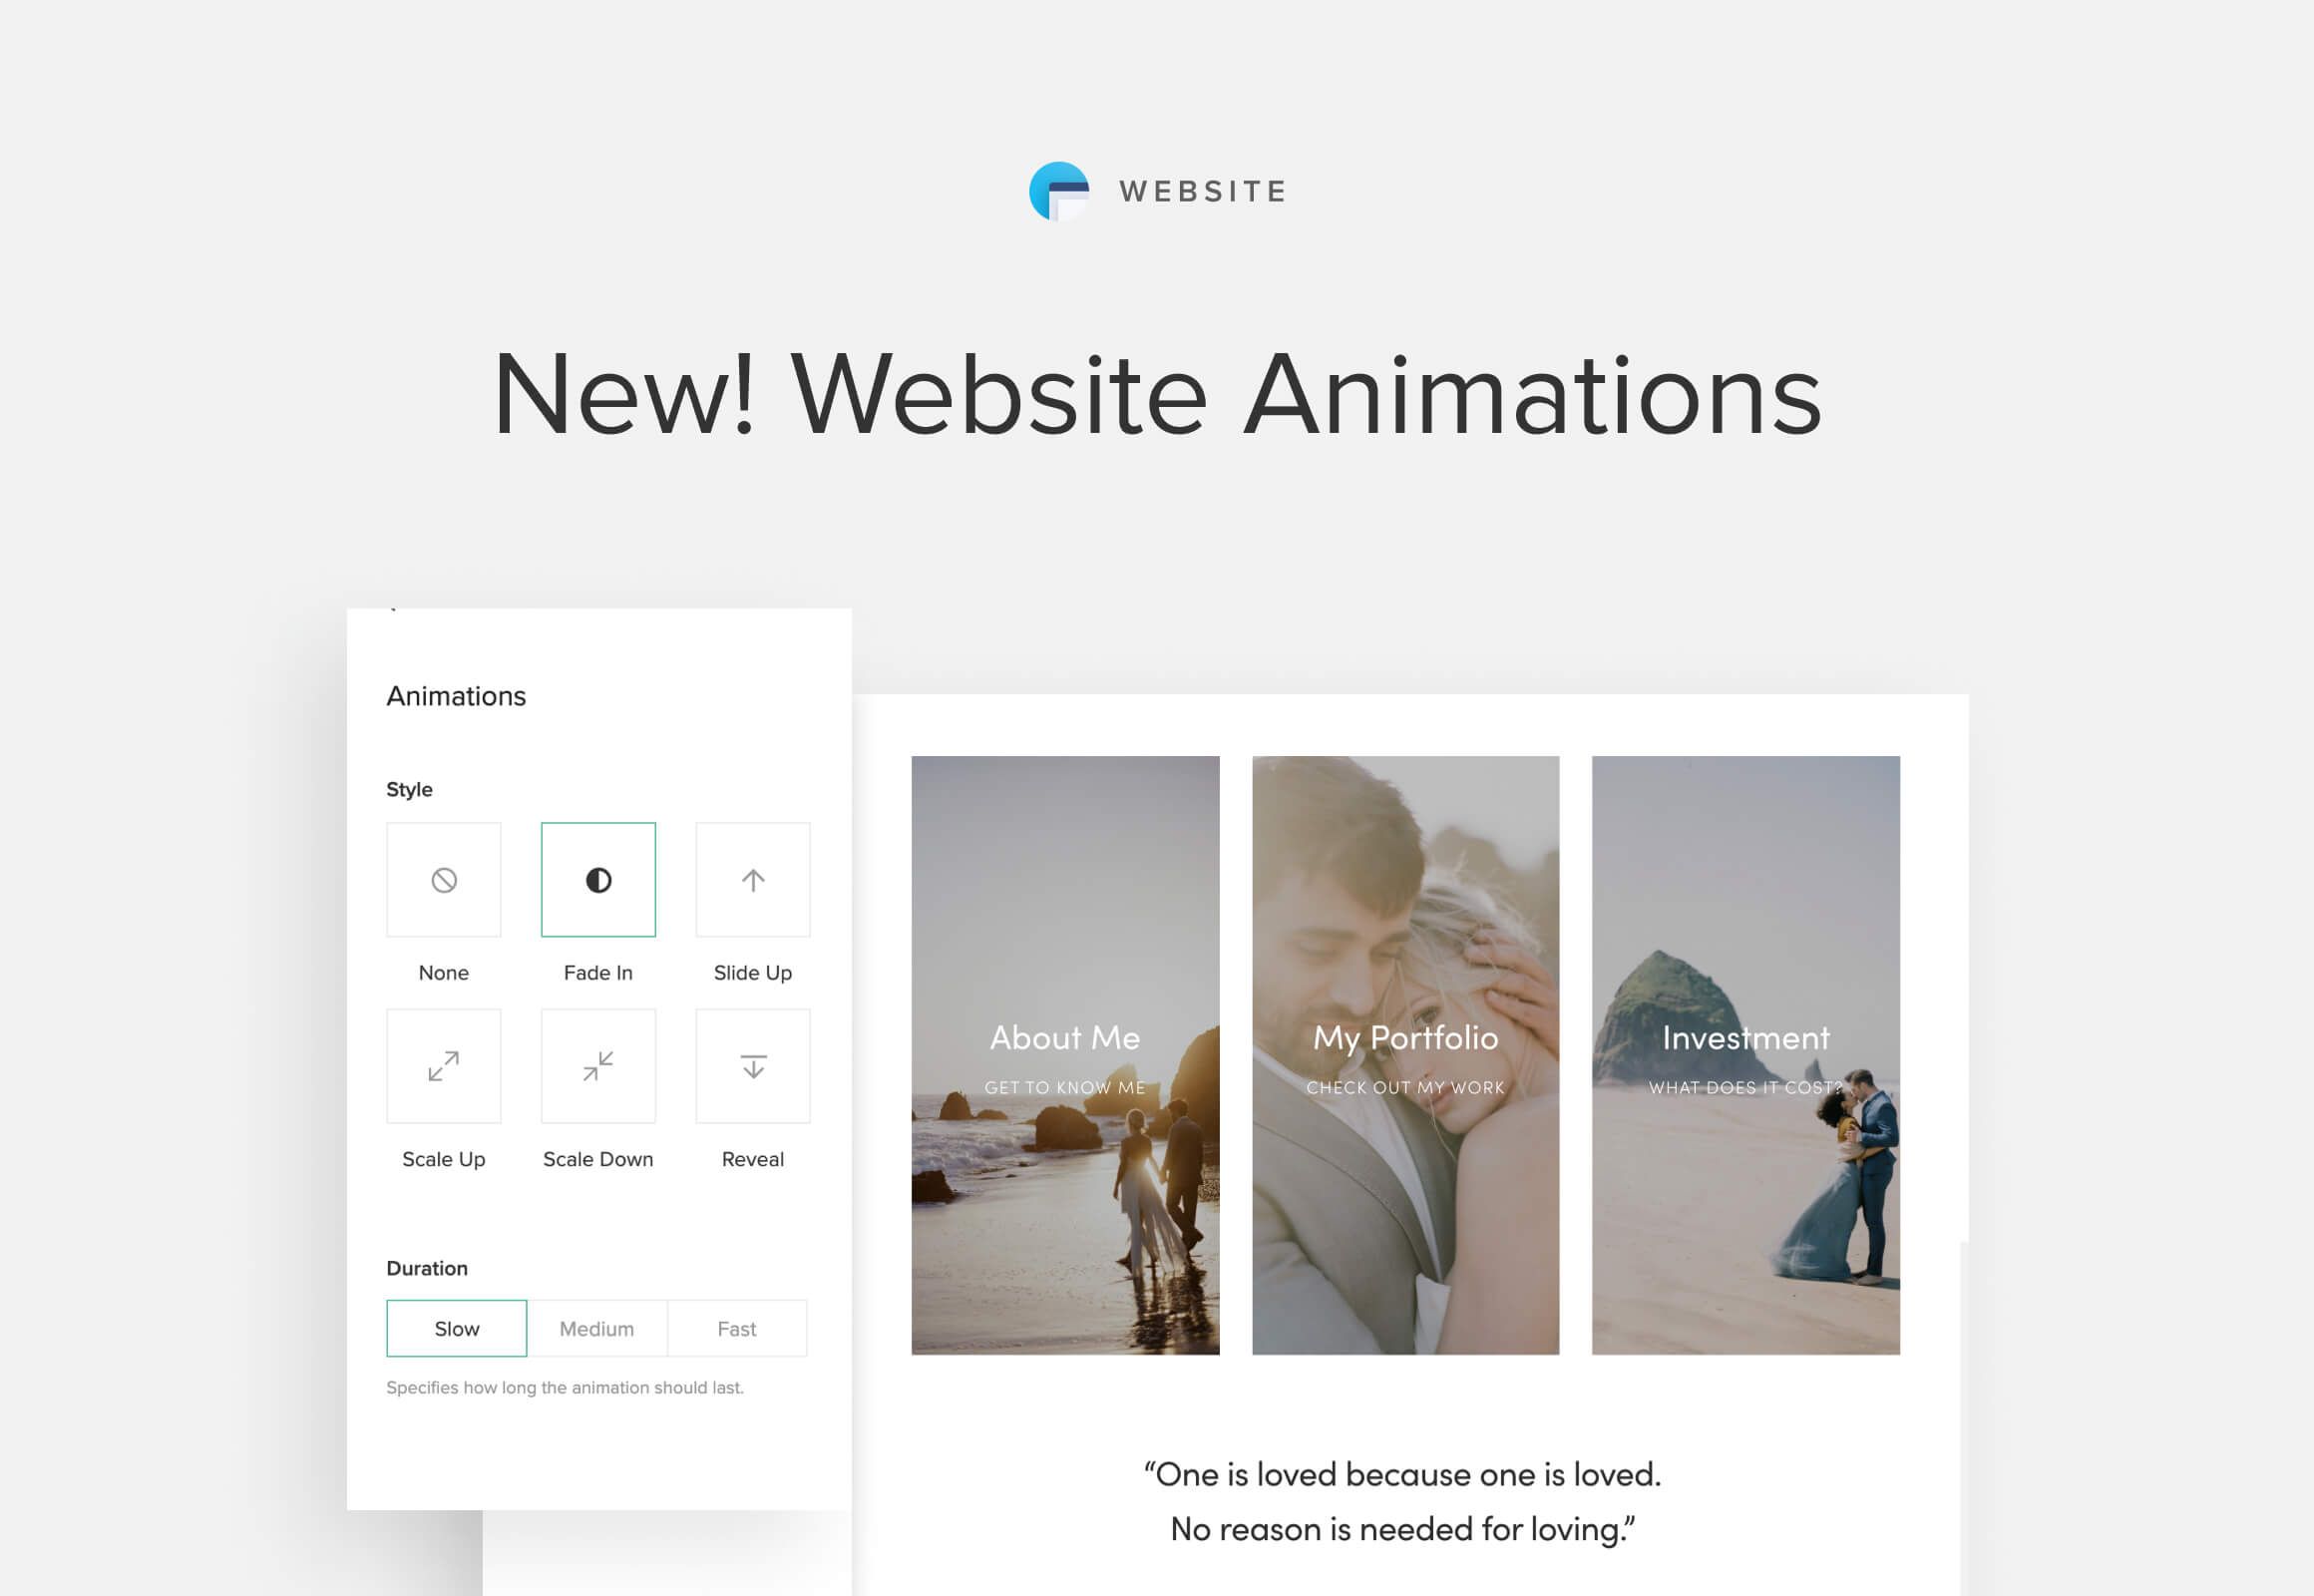 New! Site-wide animations for Pixieset Website - Pixieset Blog